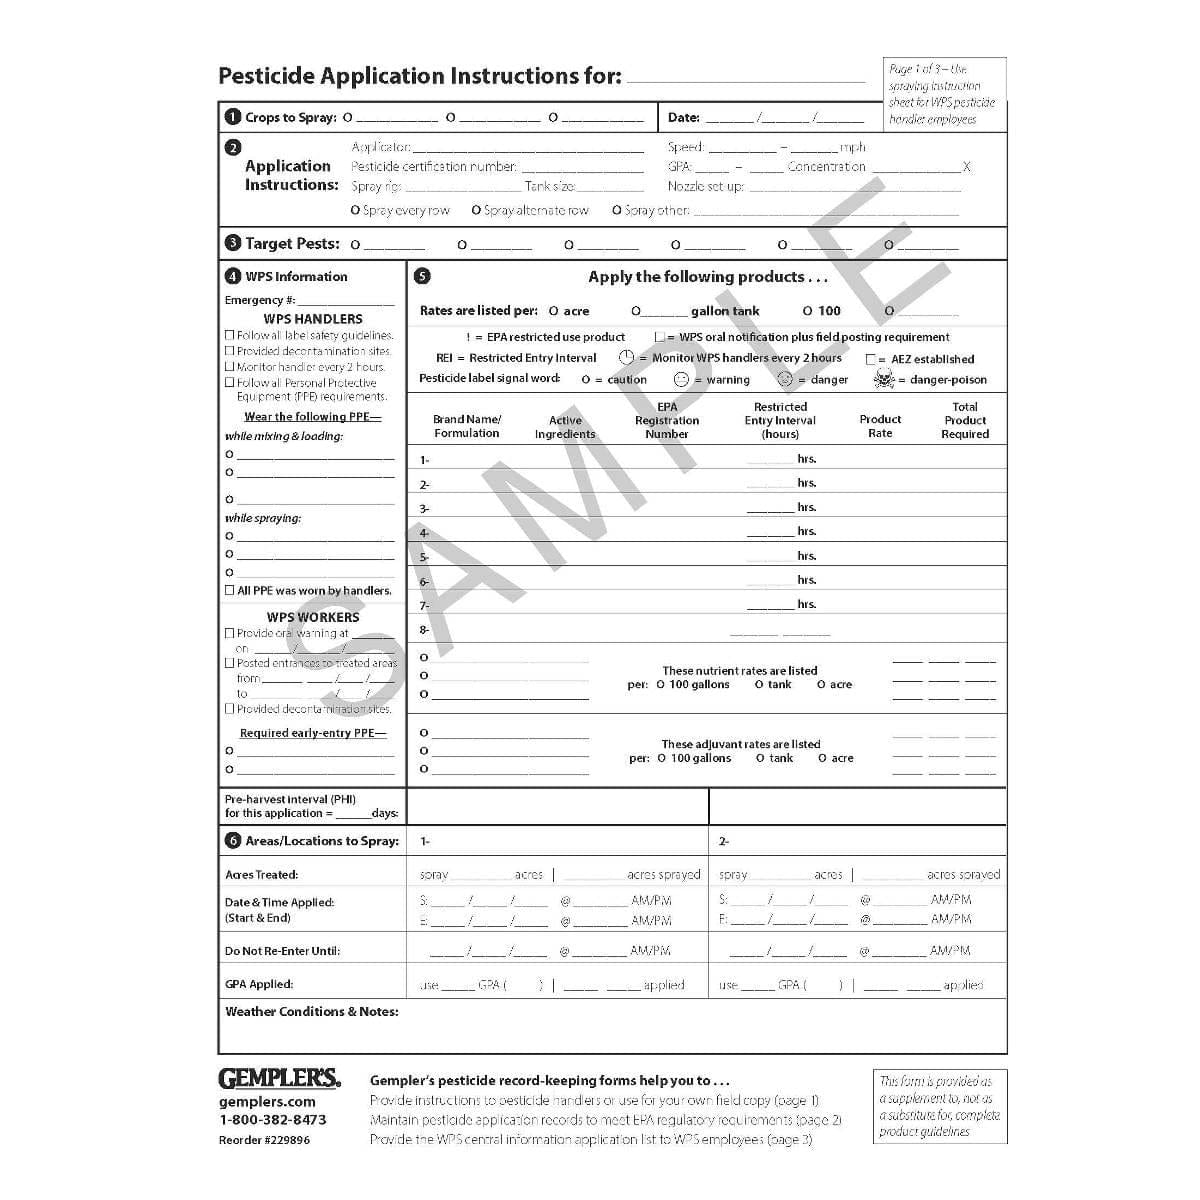 Gemplers Pesticide Record Keeping Forms